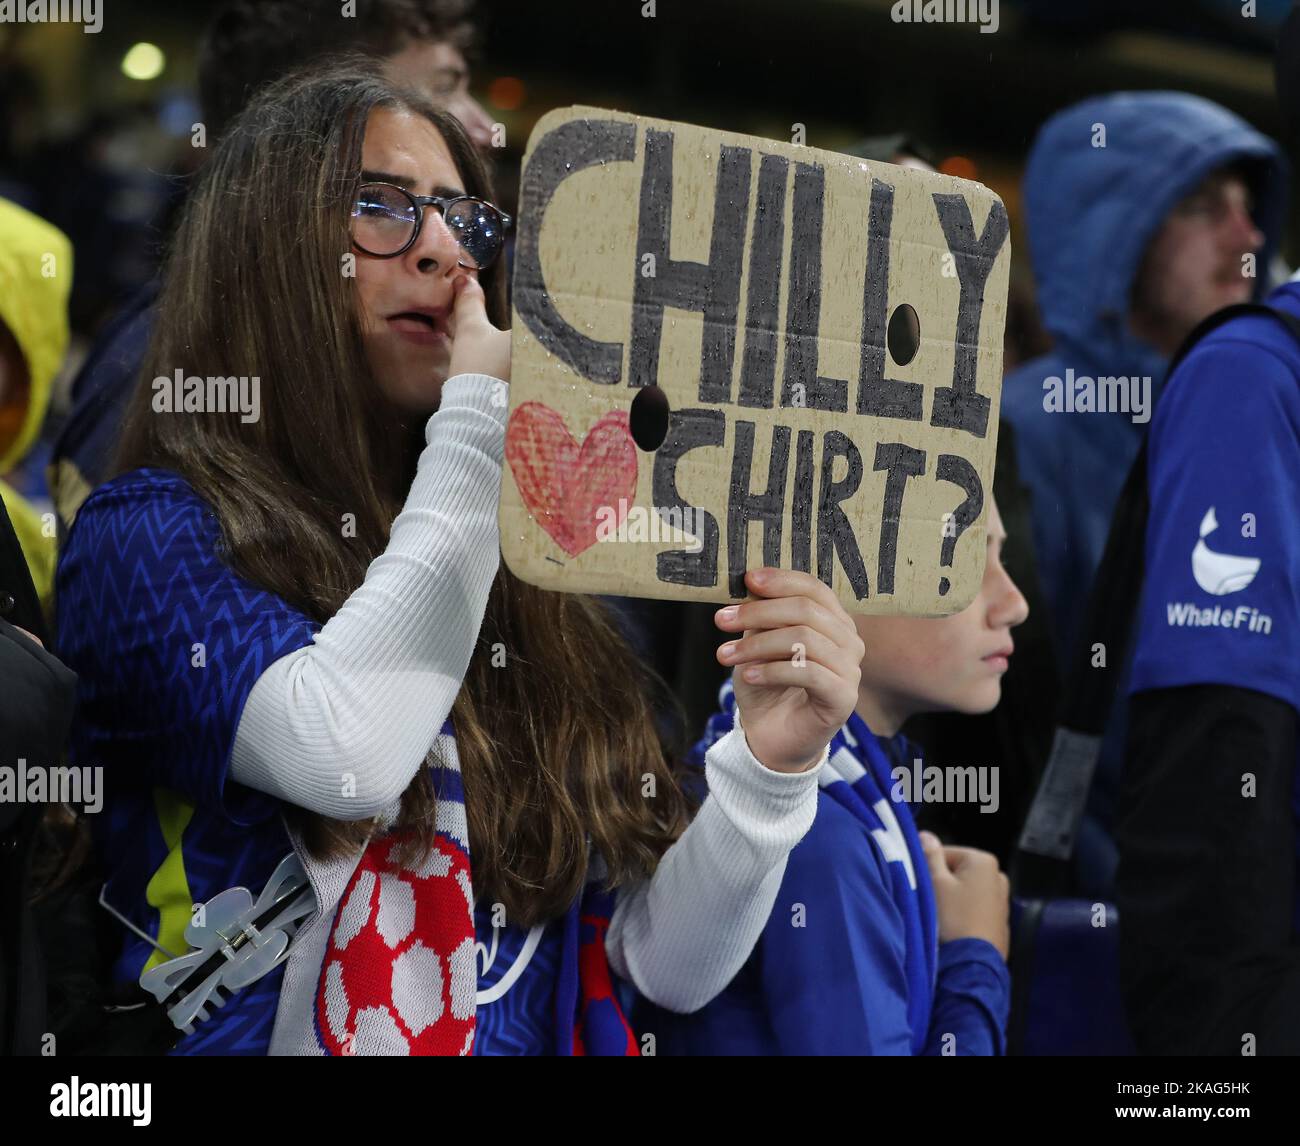 London, UK. 2nd Nov, 2022. A fan holds ip a sign saying “Chilly Shirt?' Asking for Ben Chilwell's shirt during the UEFA Champions League match at Stamford Bridge, London. Picture credit should read: Paul Terry/Sportimage Credit: Sportimage/Alamy Live News Stock Photo